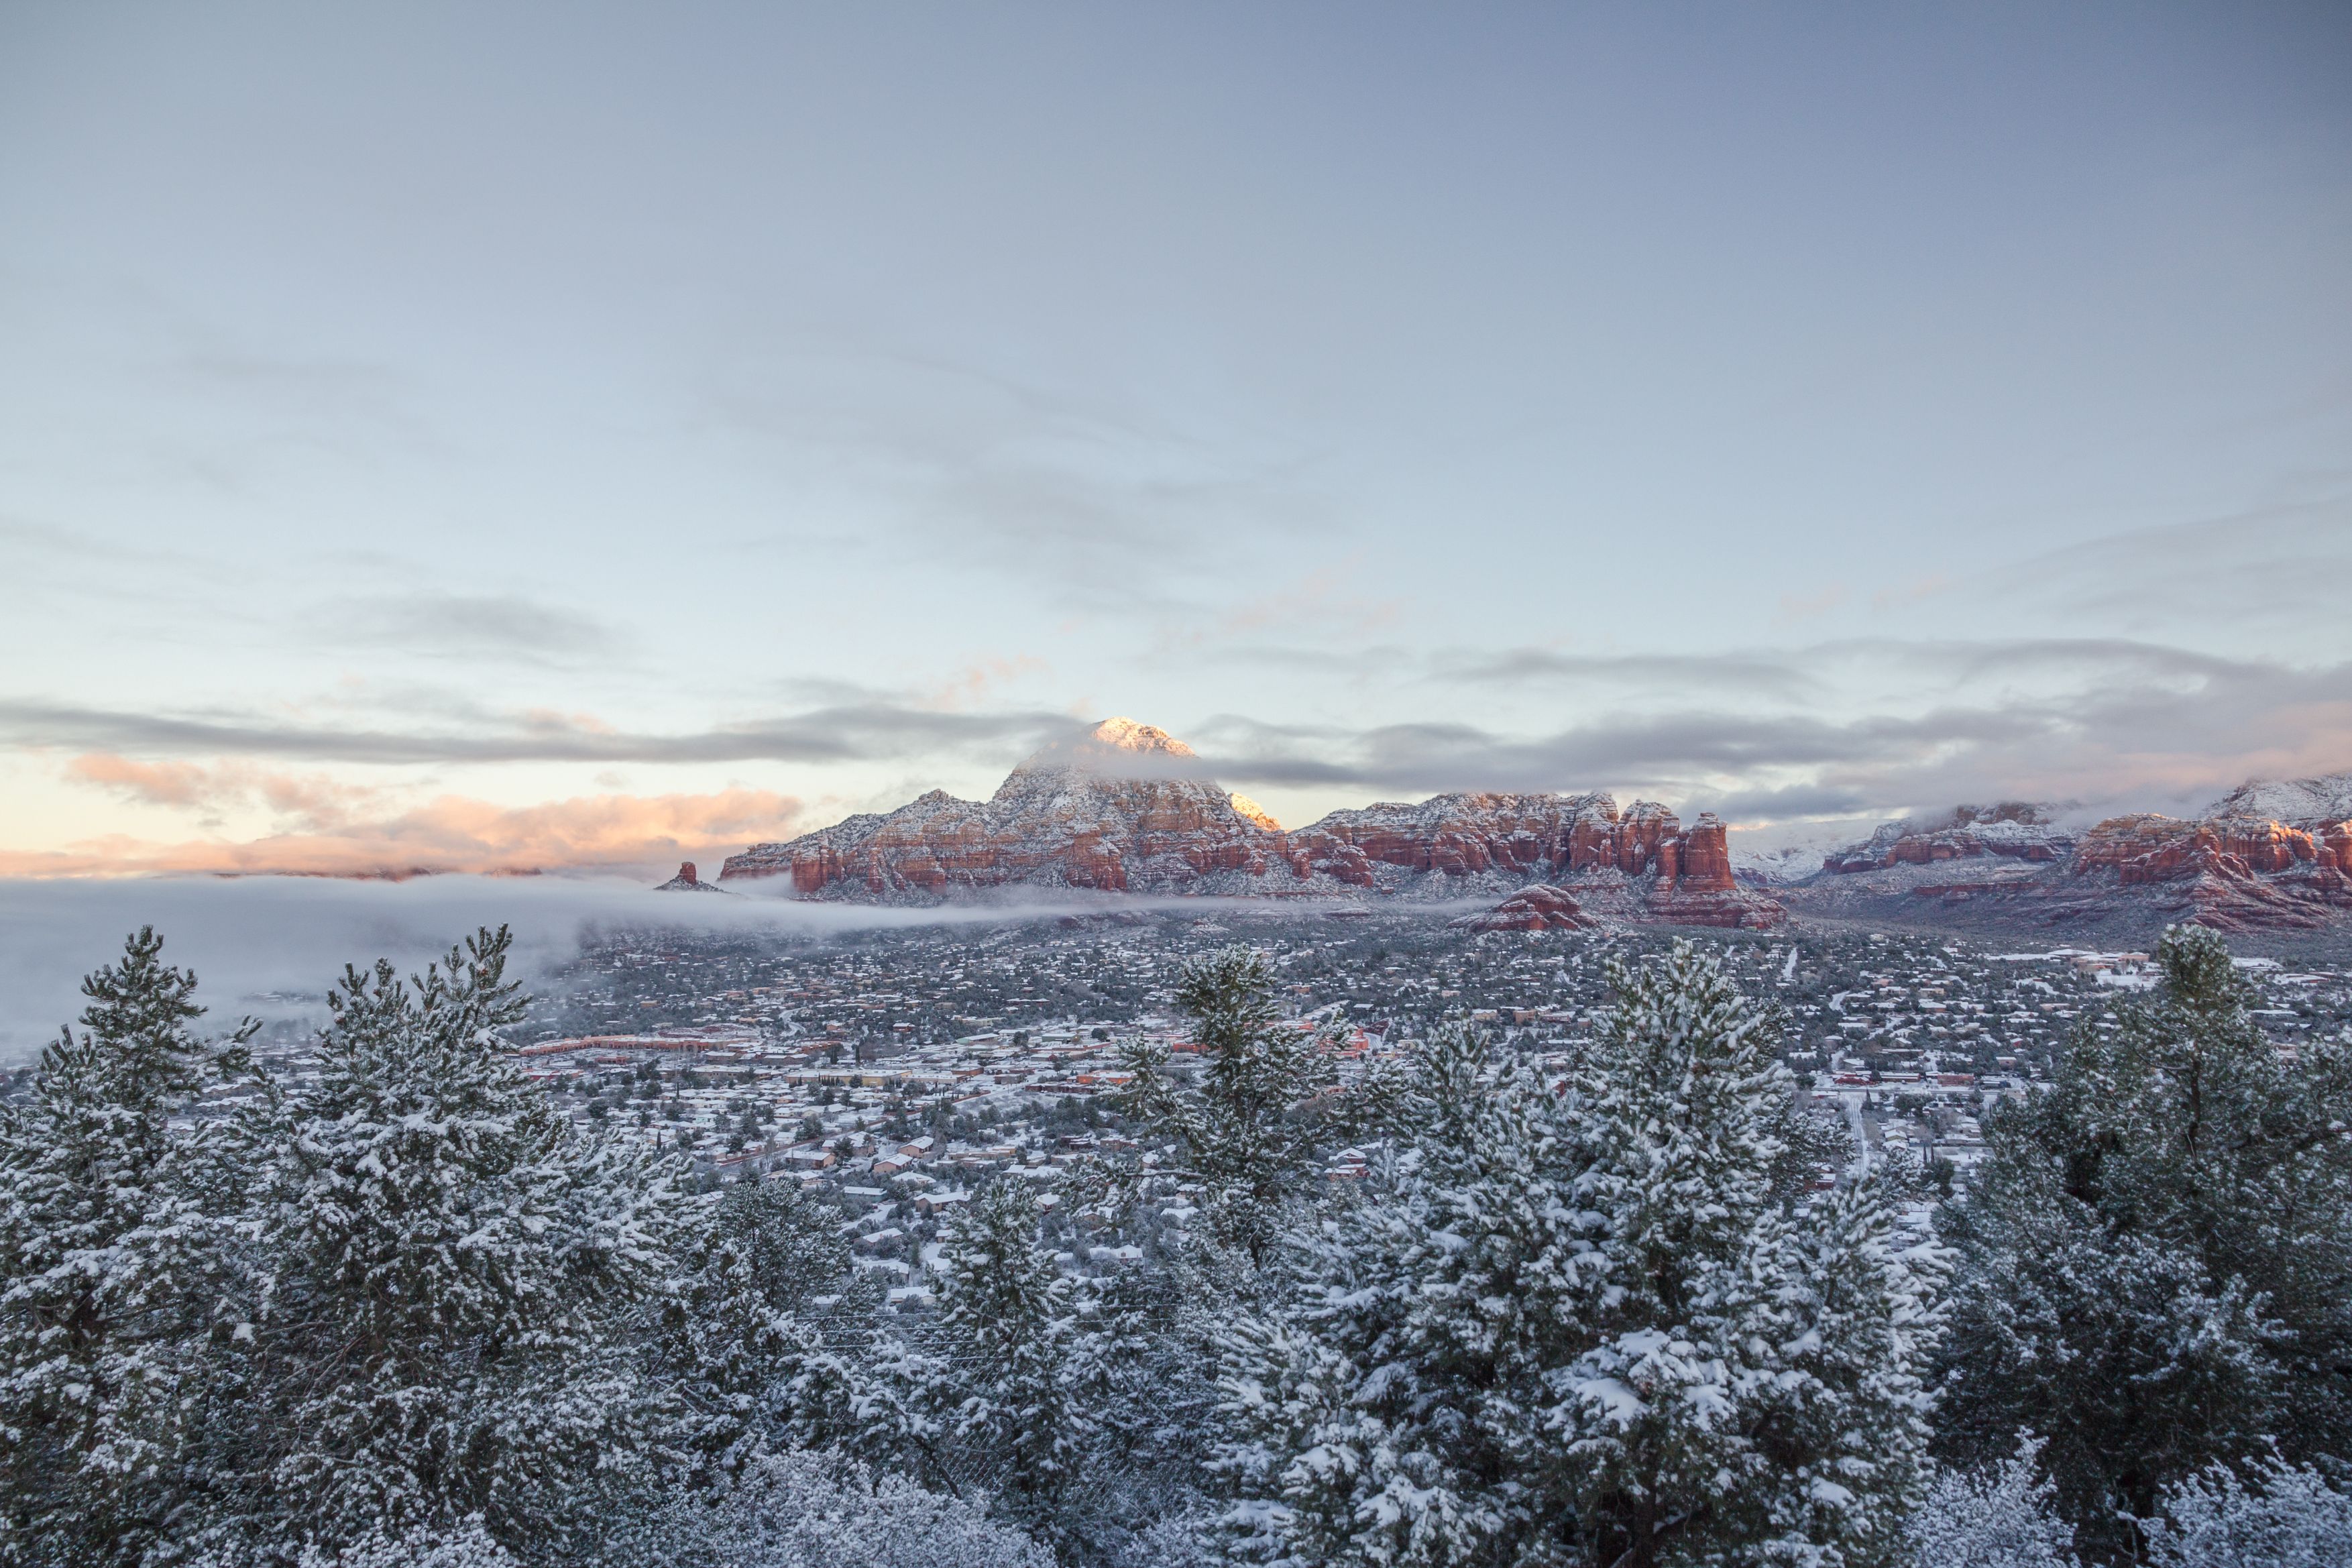 Looking north across Sedona covered with snow towards Thunder Mountain aka Capitol Butte just after dawn. Horizontal image with copy space and crisp, clear winter light.